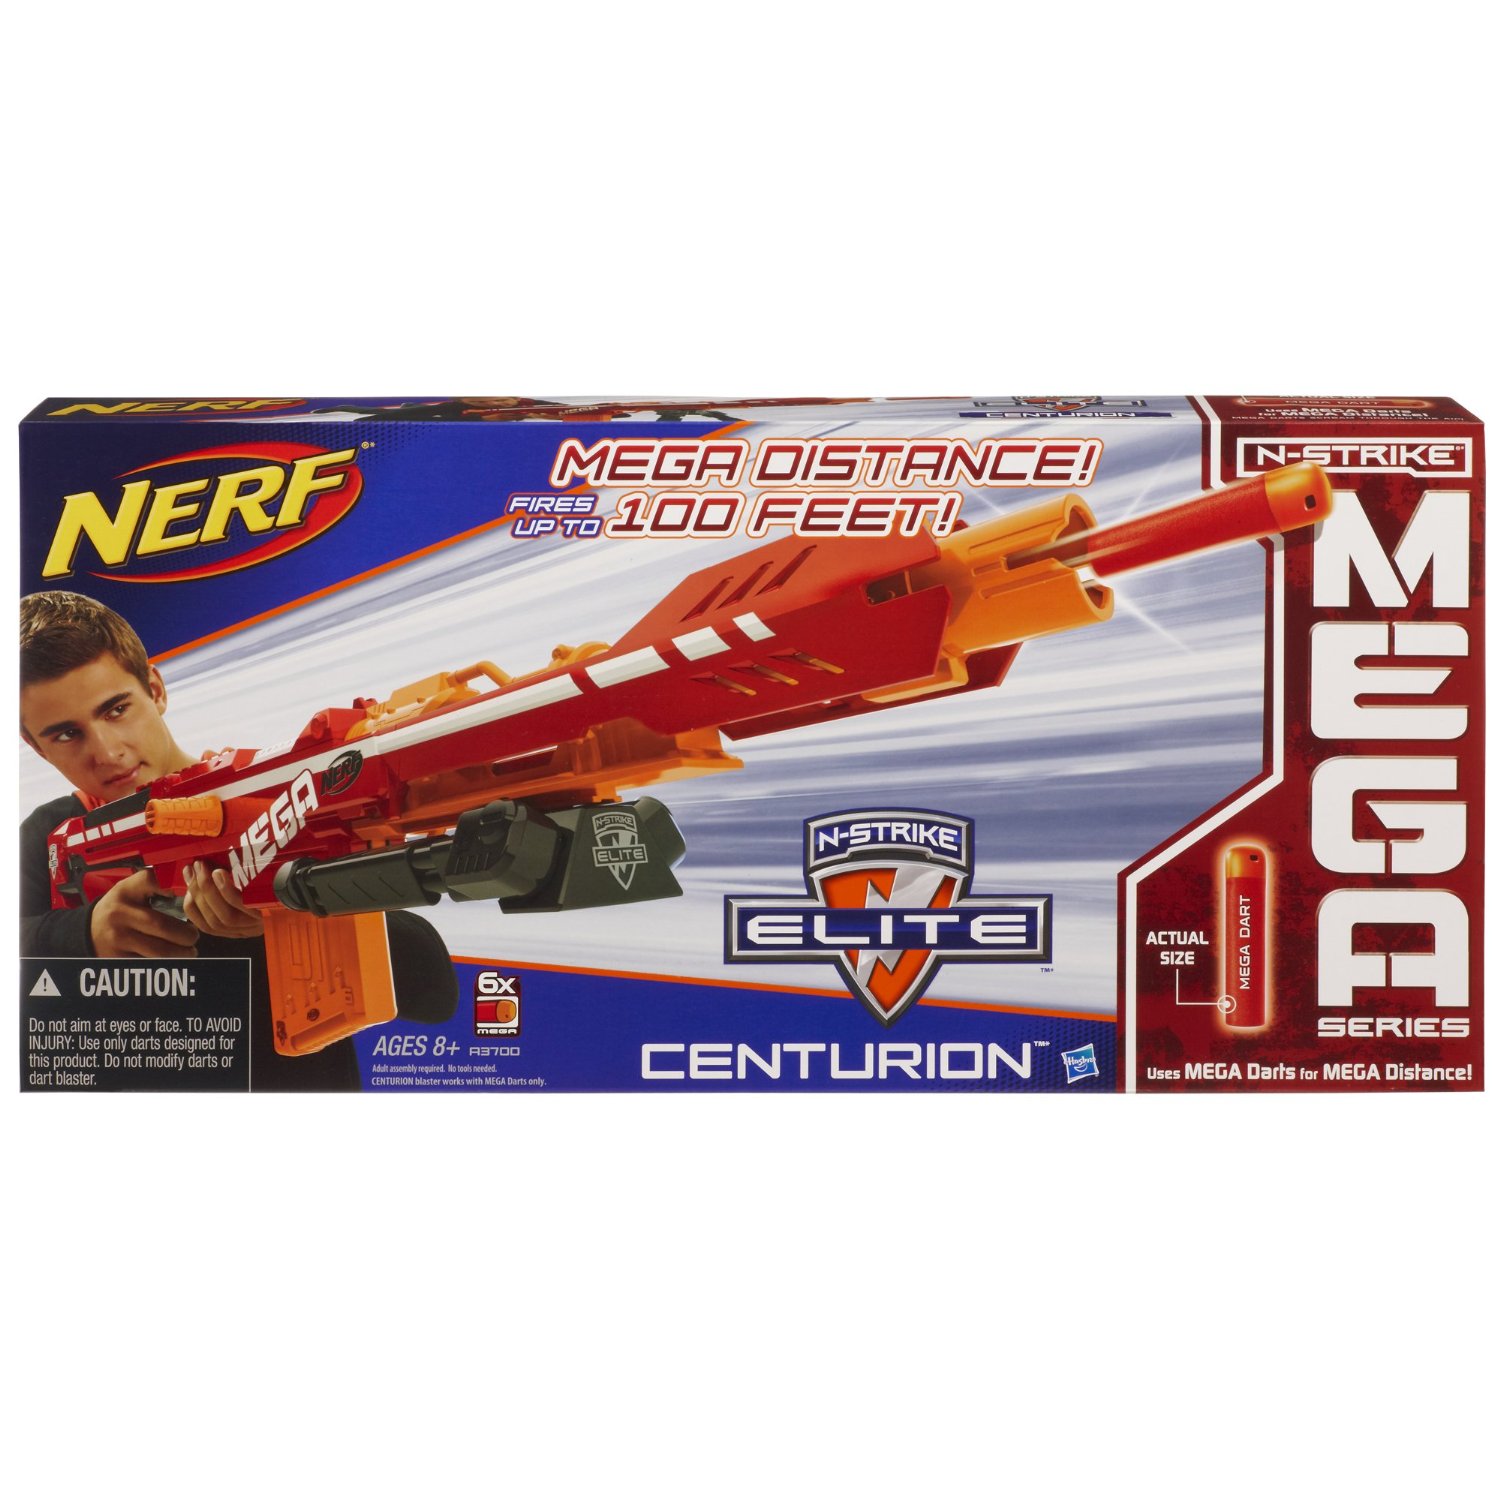 NERF Longstrike Modulus Toy Blaster with Barrel Extension, Bipod, Scopes,  18 Elite Darts & 3 Six-Clips ( Exclusive)